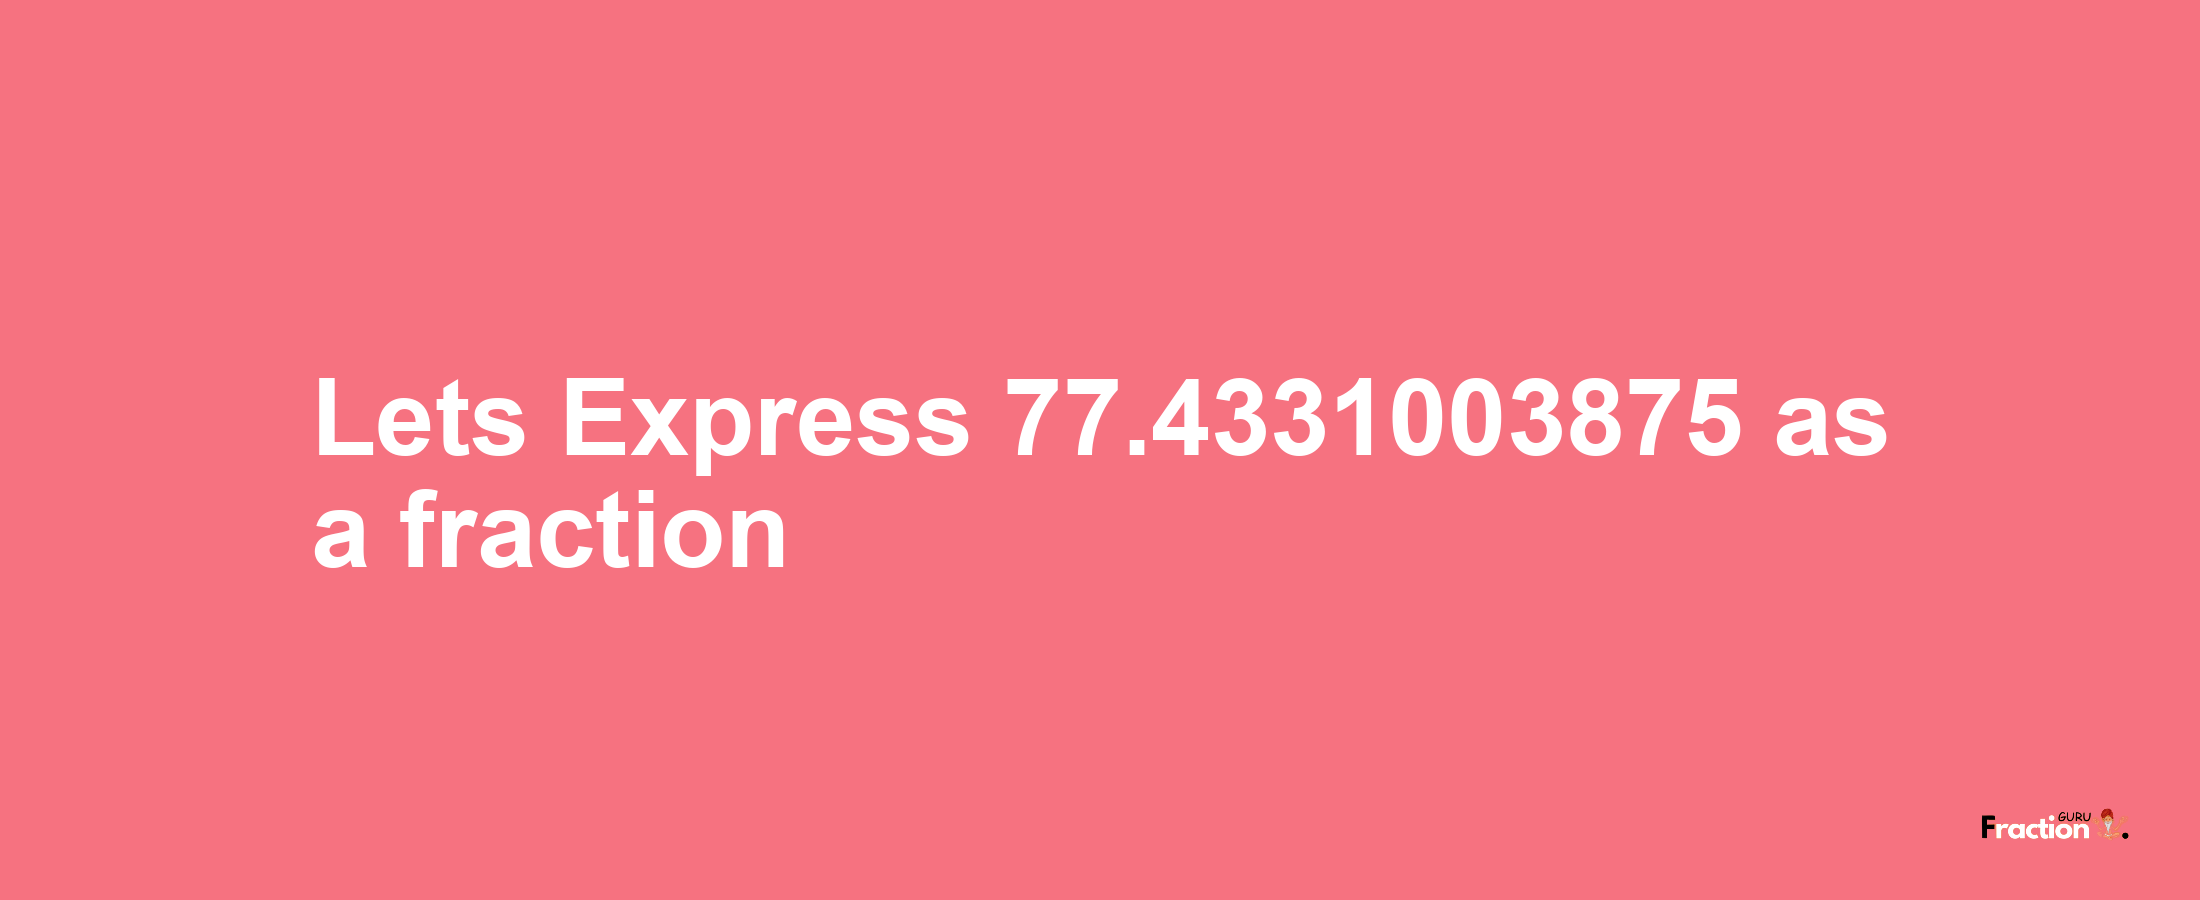 Lets Express 77.4331003875 as afraction